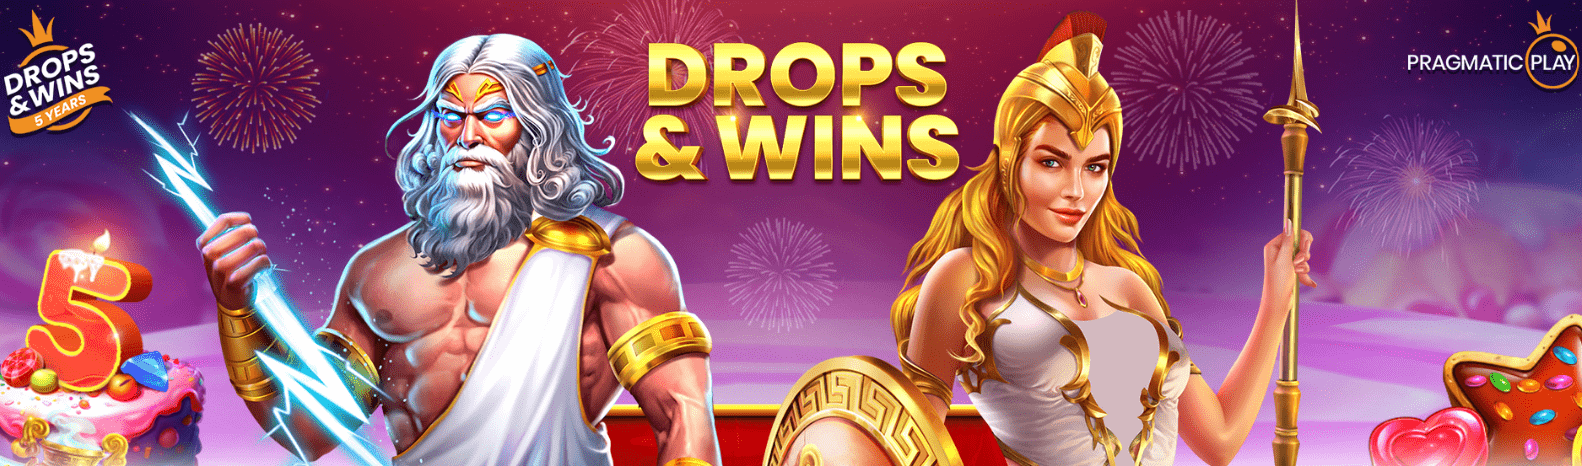 bettarget casino drop and wins promotion